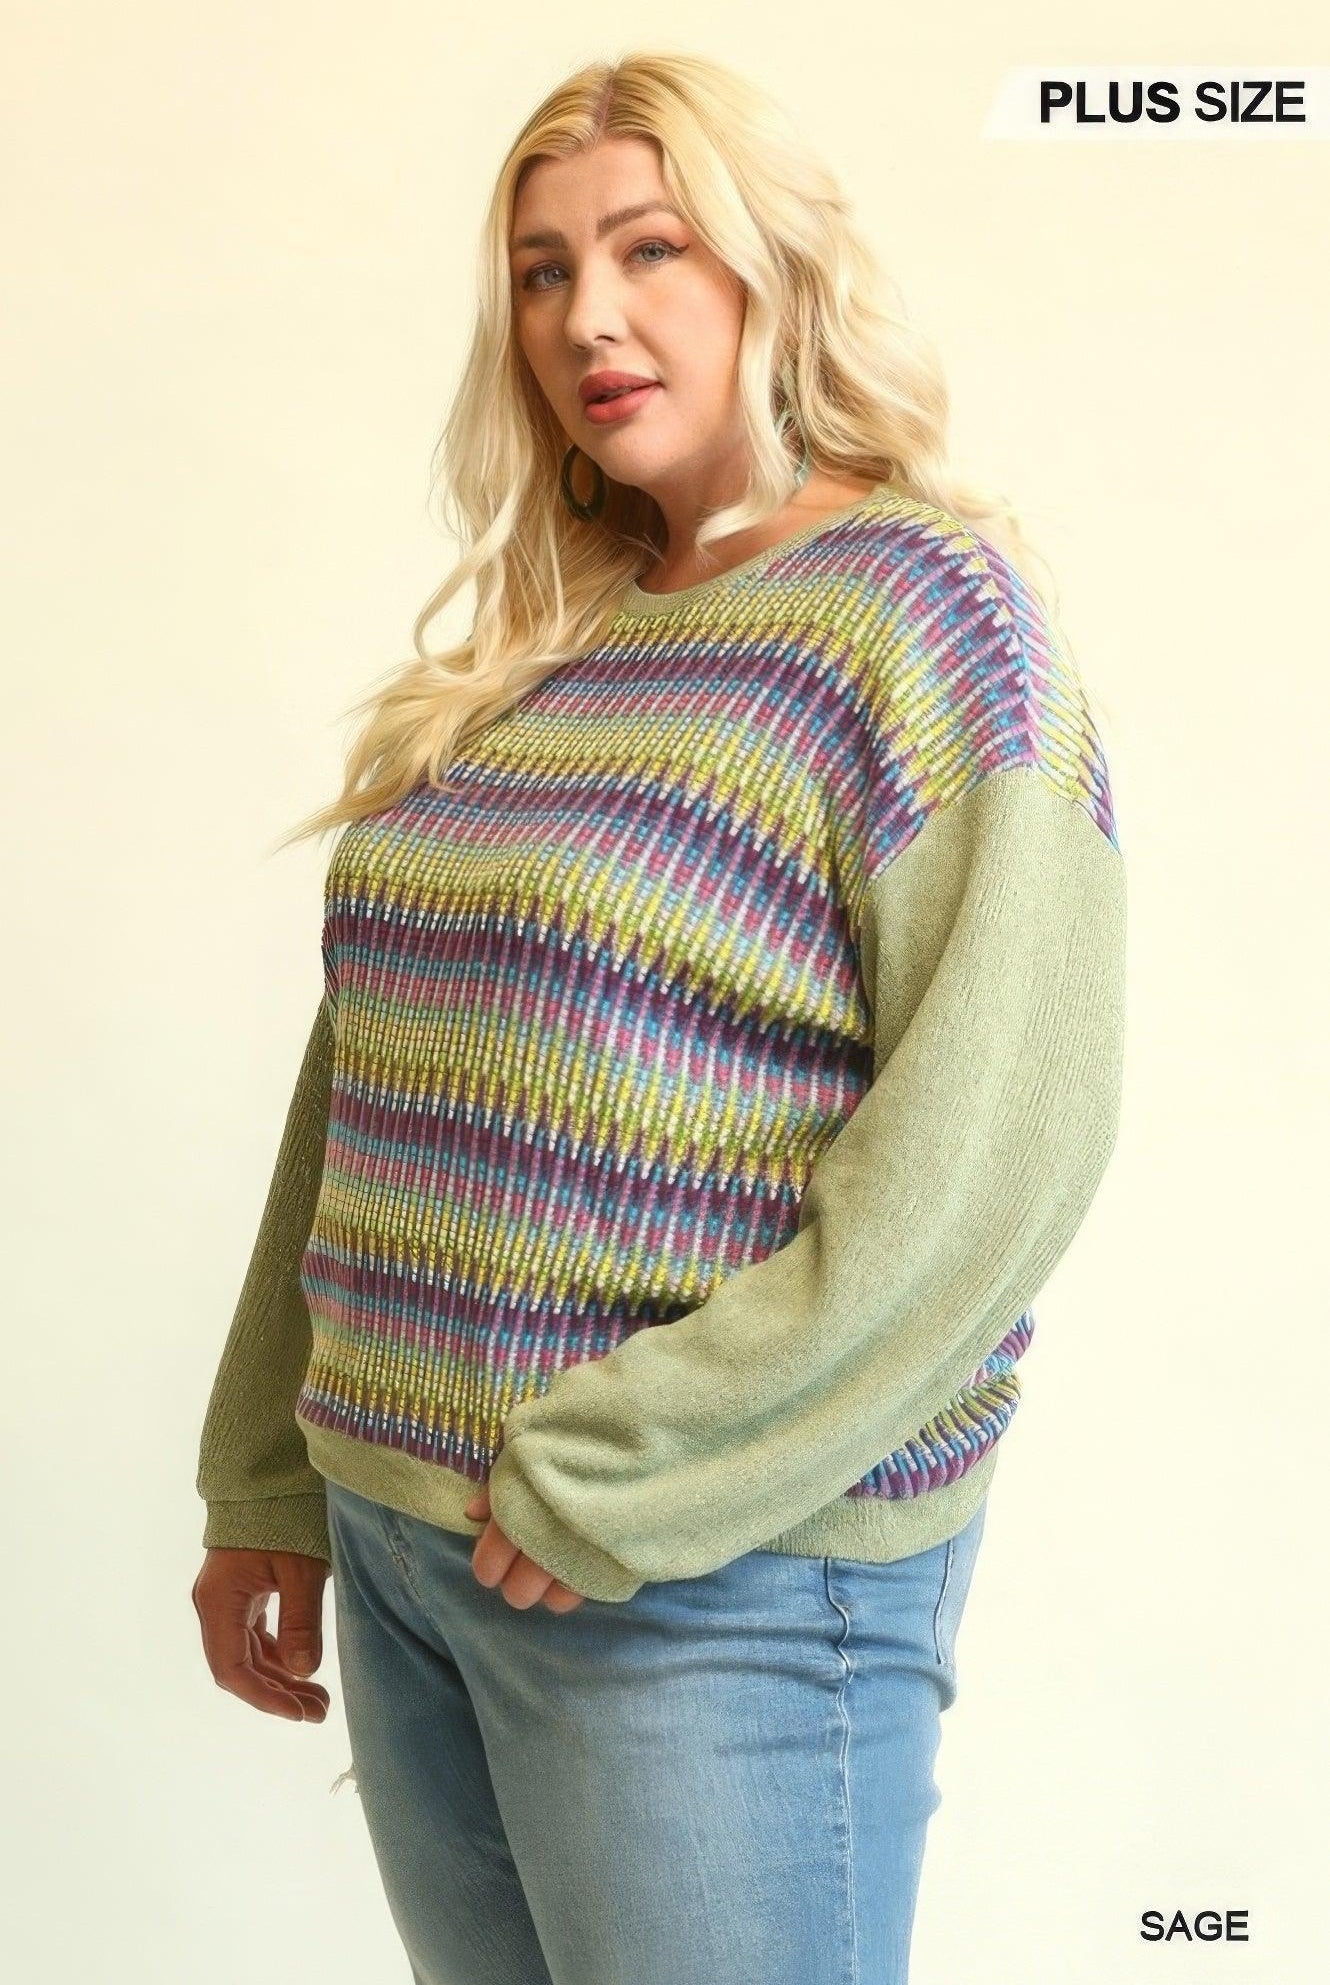 Women's Shirts Multi Color Novelty Knit Solid Knit Mixed Loose Top with Drop Down Shoulder